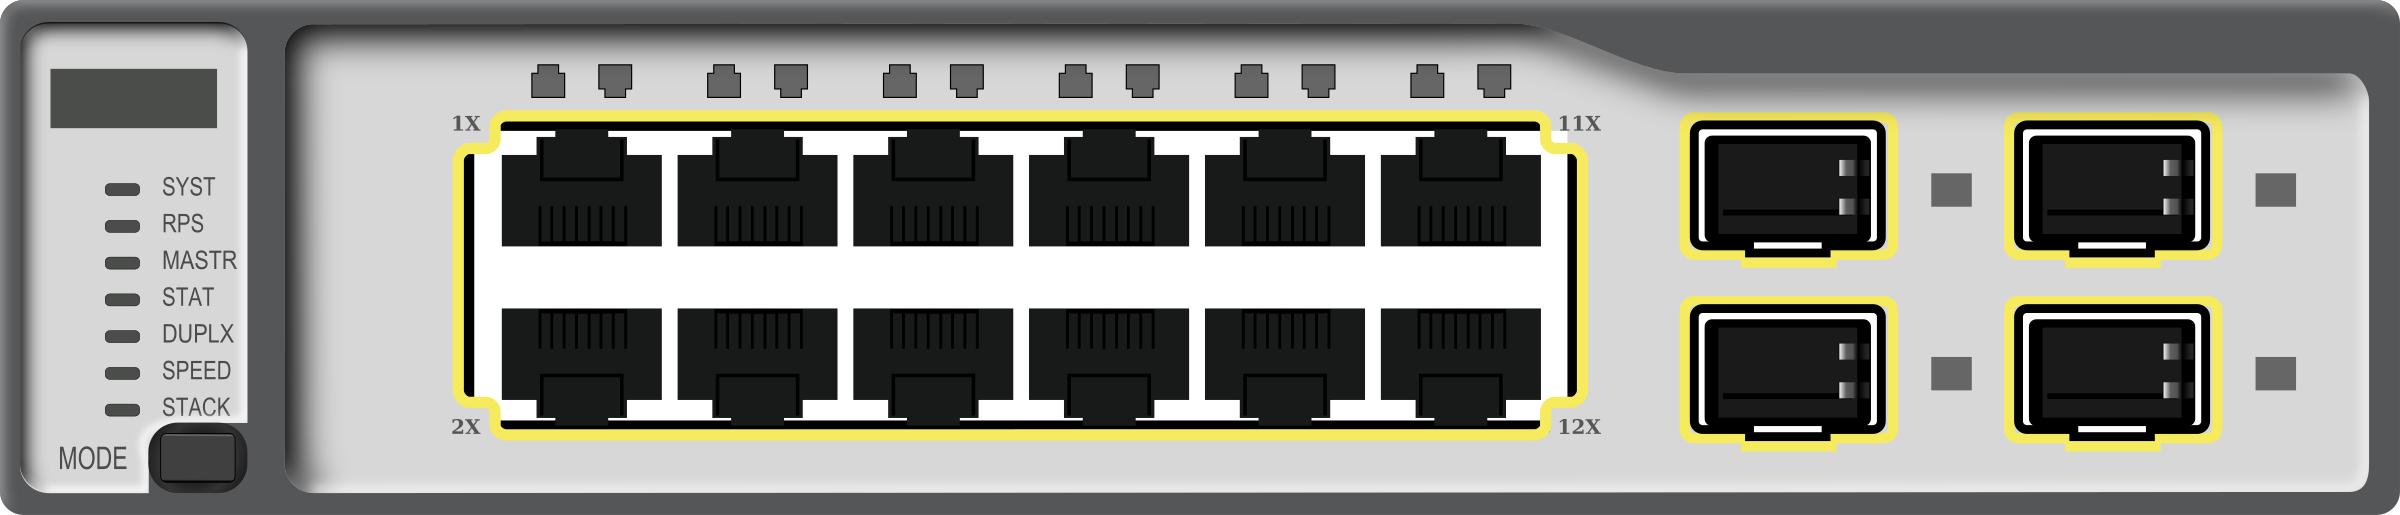 Remix of Gigabit Layer 3 Switch #1 png